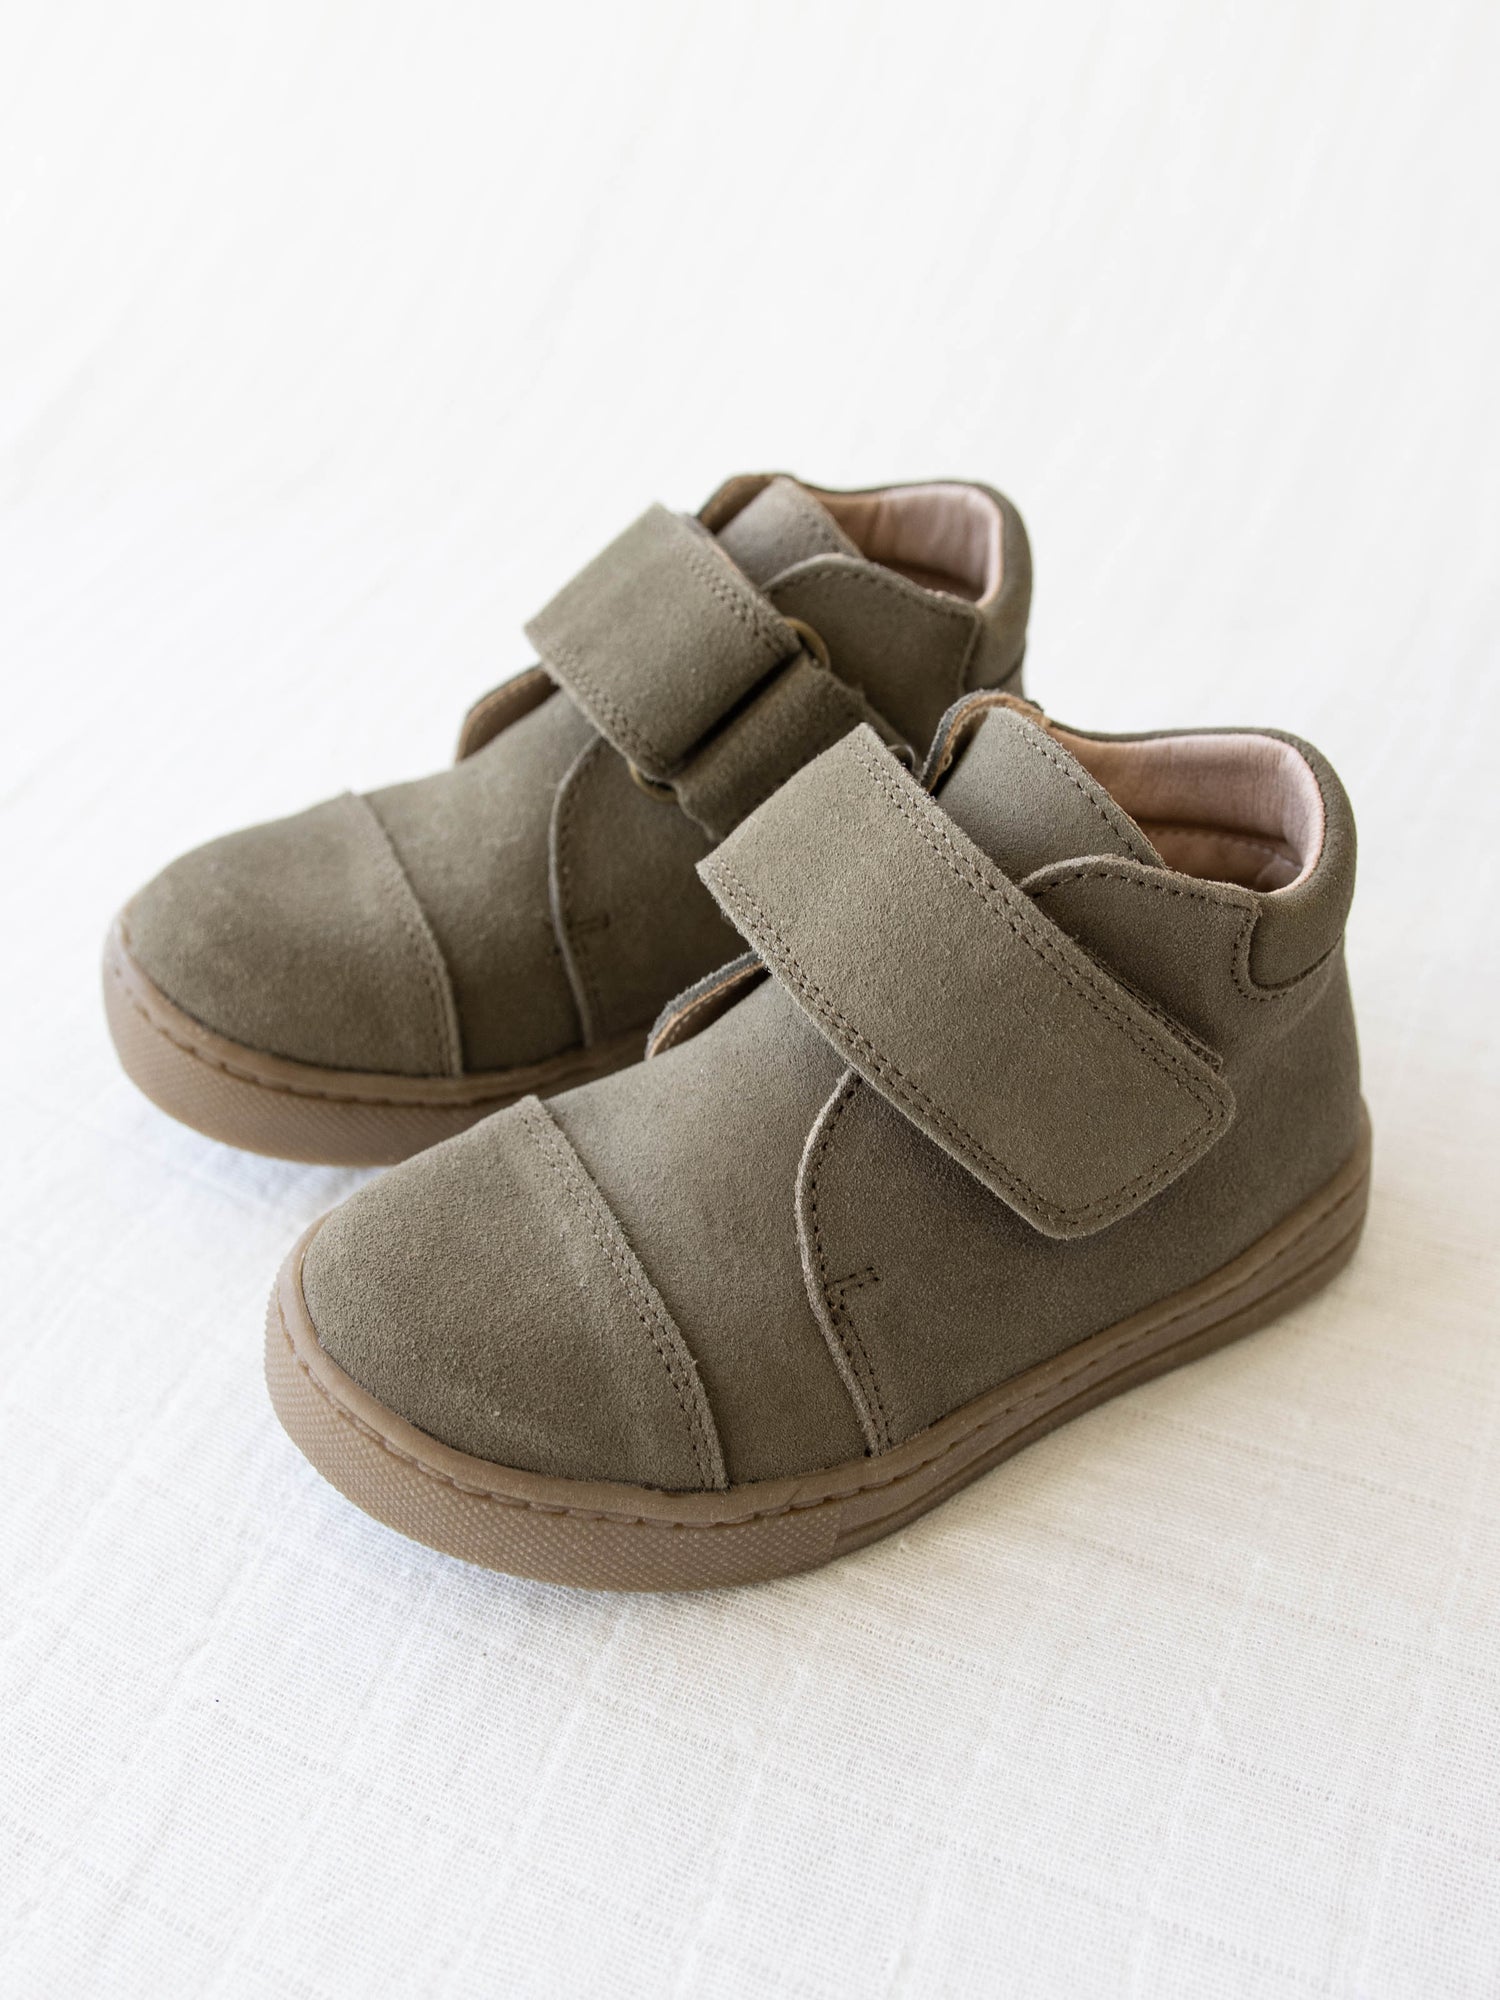 This Suede Mid Boot comes in a Sage color with a brown rubber sole and wide velcro strap across the top of the foot.